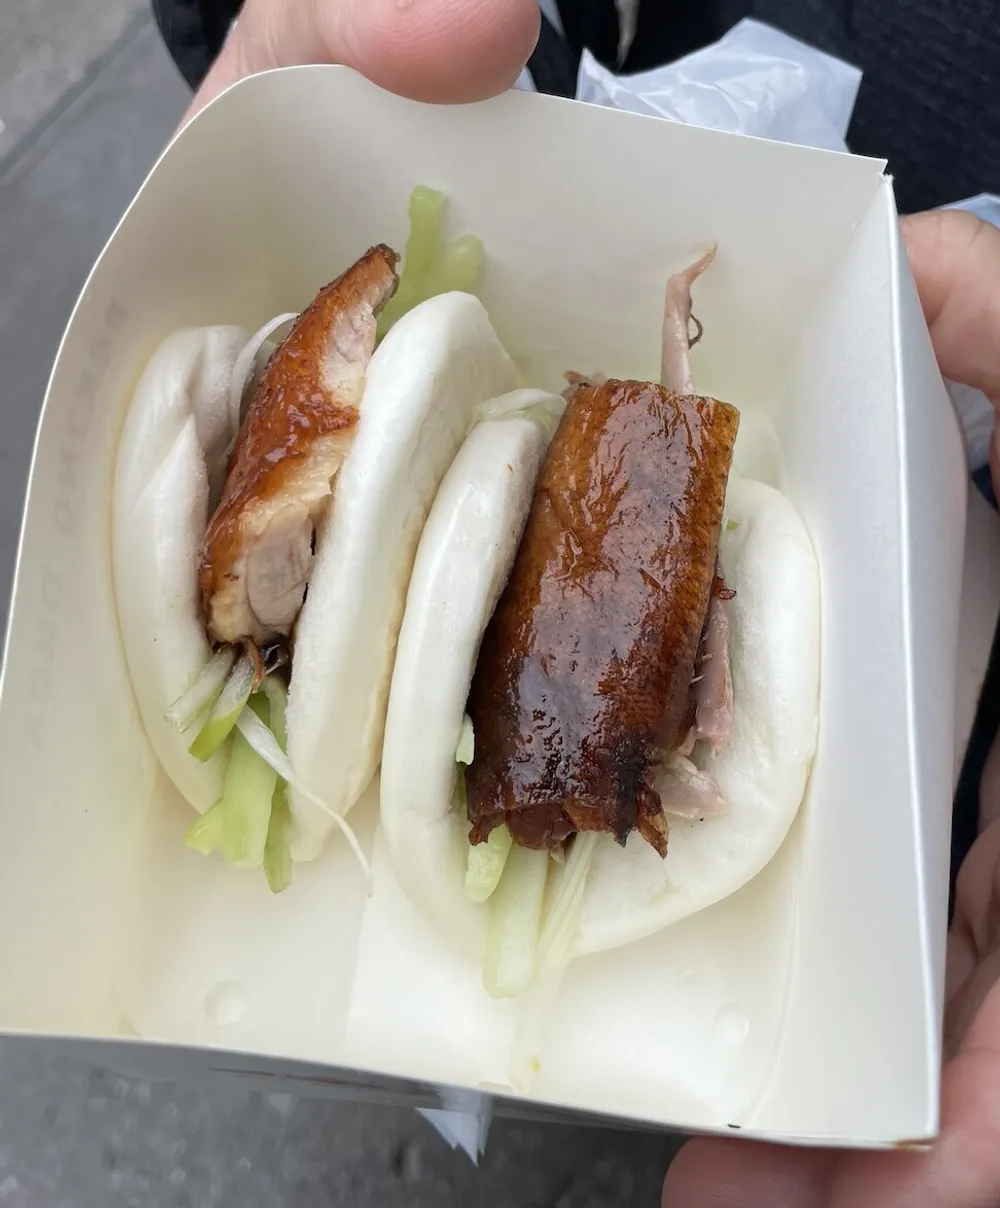 A person is holding a small container with two Asian-style steamed buns filled with succulent pieces of roasted meat and crisp cucumber